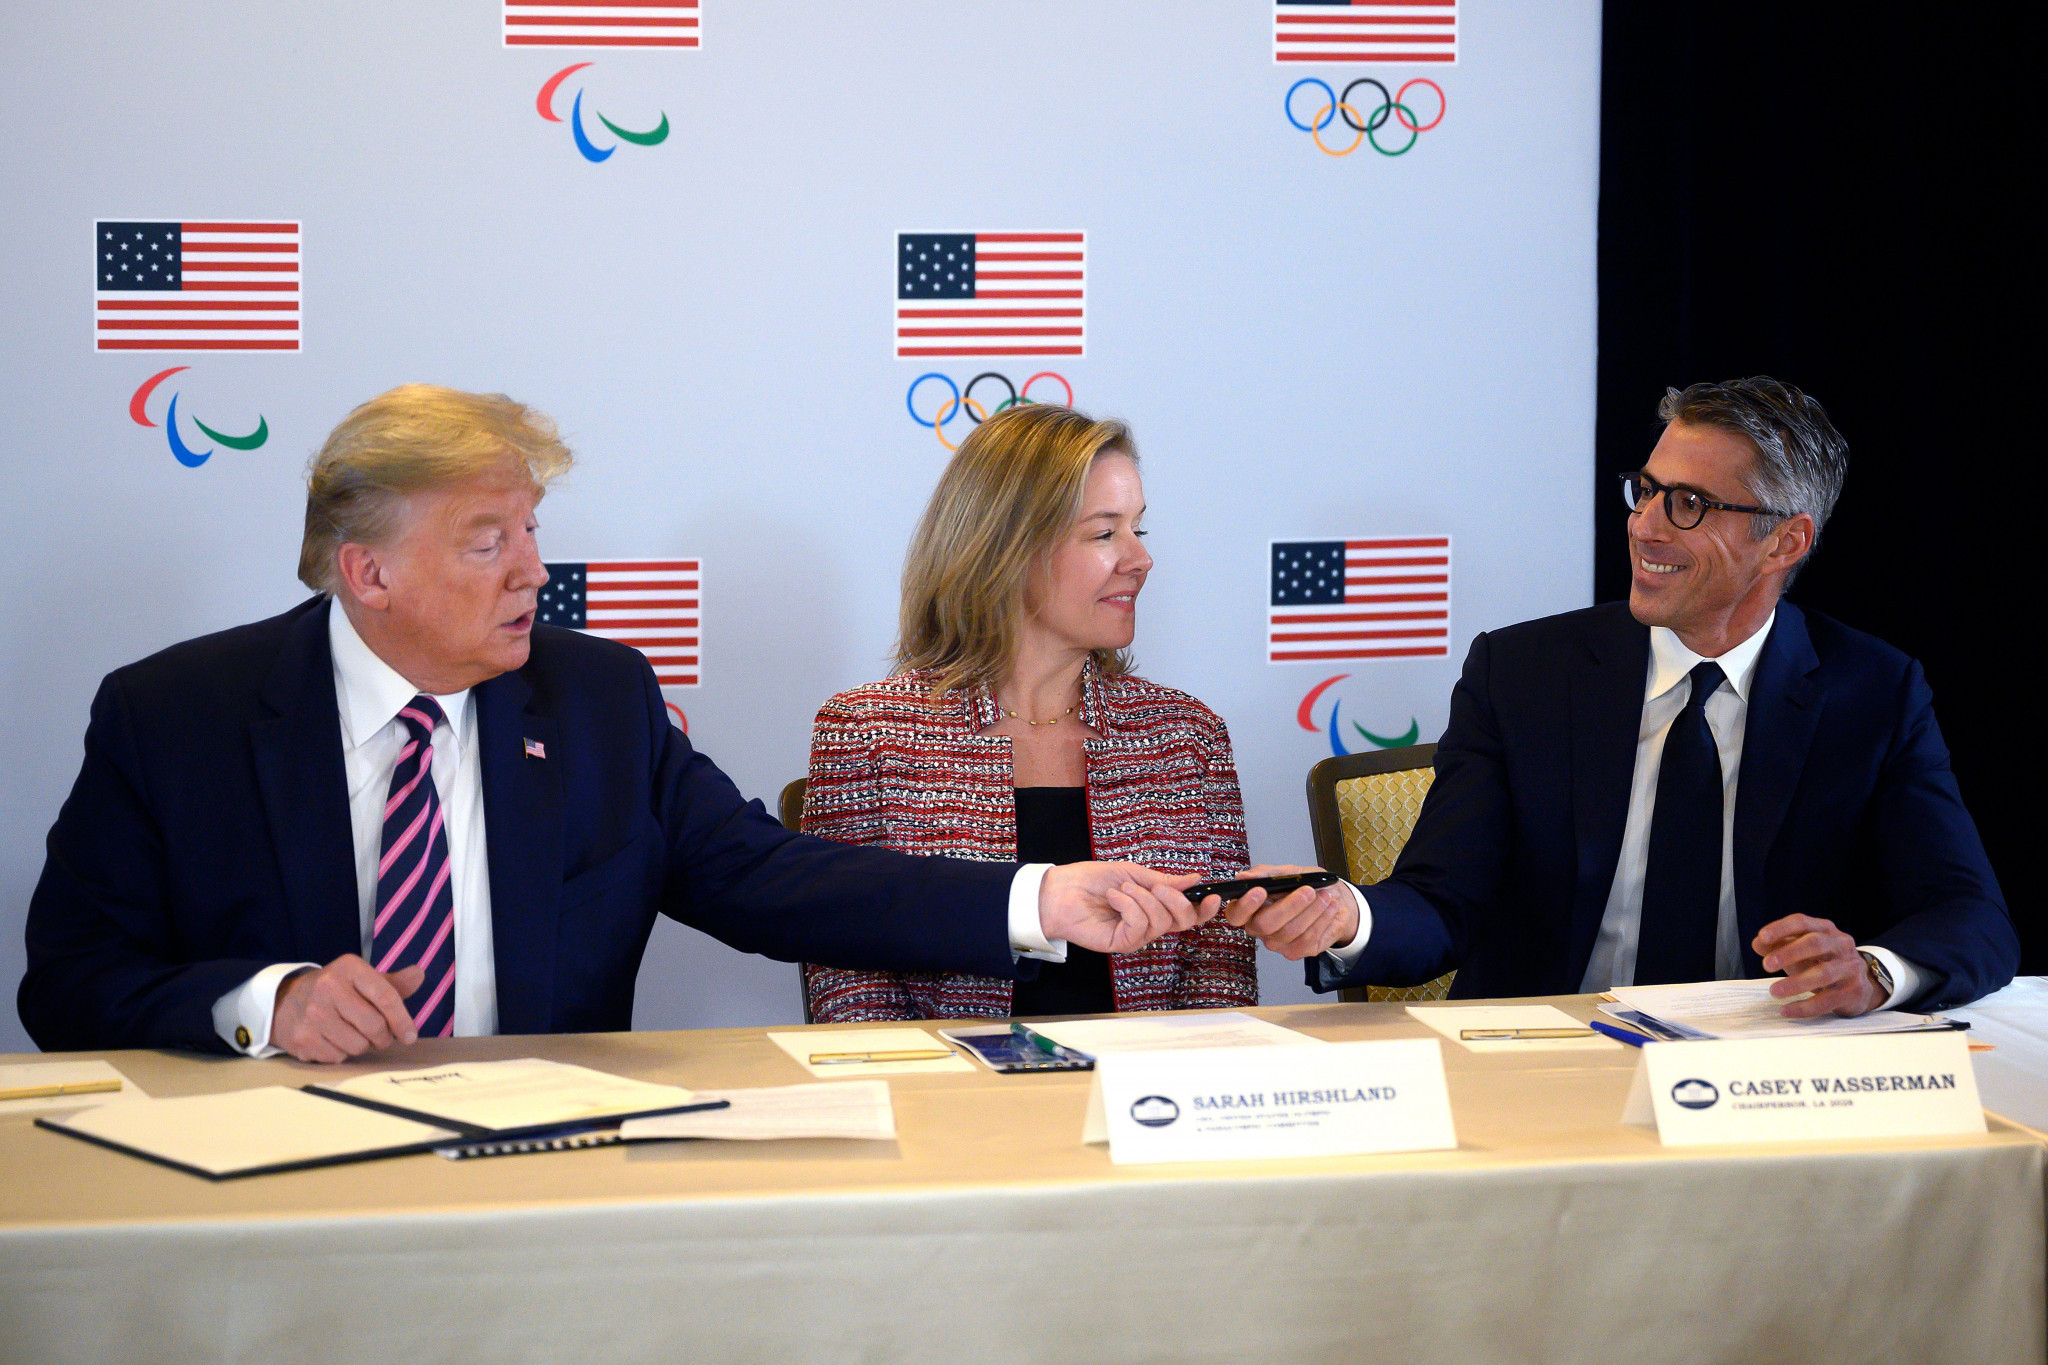 Los Angeles 2028 chairman Casey Wasserman, right, claimed they could not have won their bid to host the Olympic Games for the third time without the support of US President Donald Trump ©Getty Images